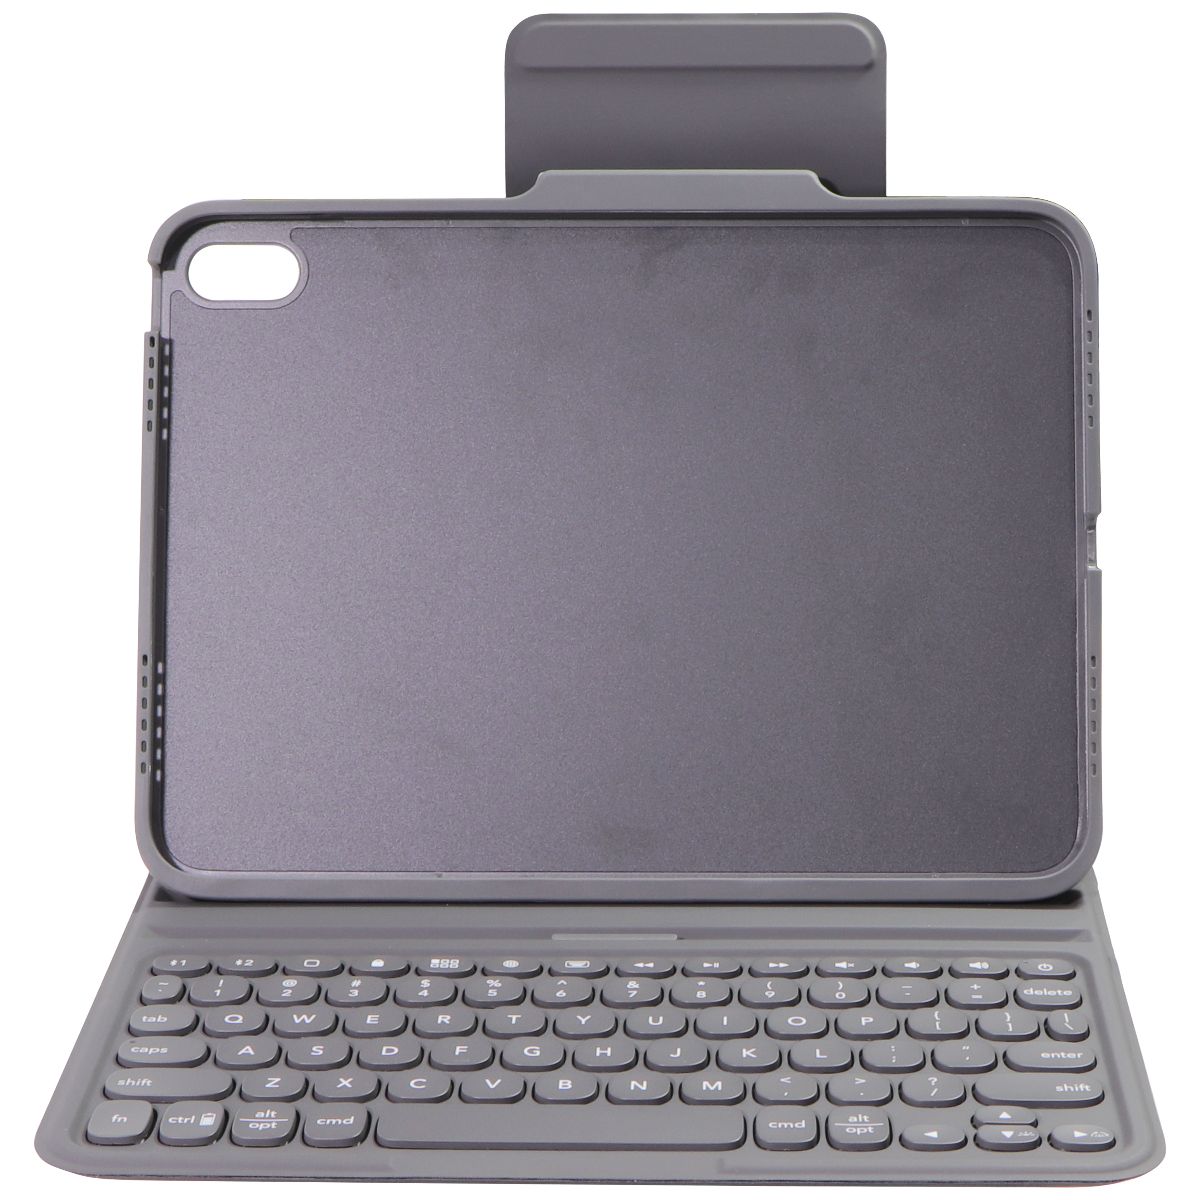 ZAGG Pro Keys Keyboard Folio Case for Apple iPad (10th Gen) - Black iPad/Tablet Accessories - Cases, Covers, Keyboard Folios Zagg    - Simple Cell Bulk Wholesale Pricing - USA Seller